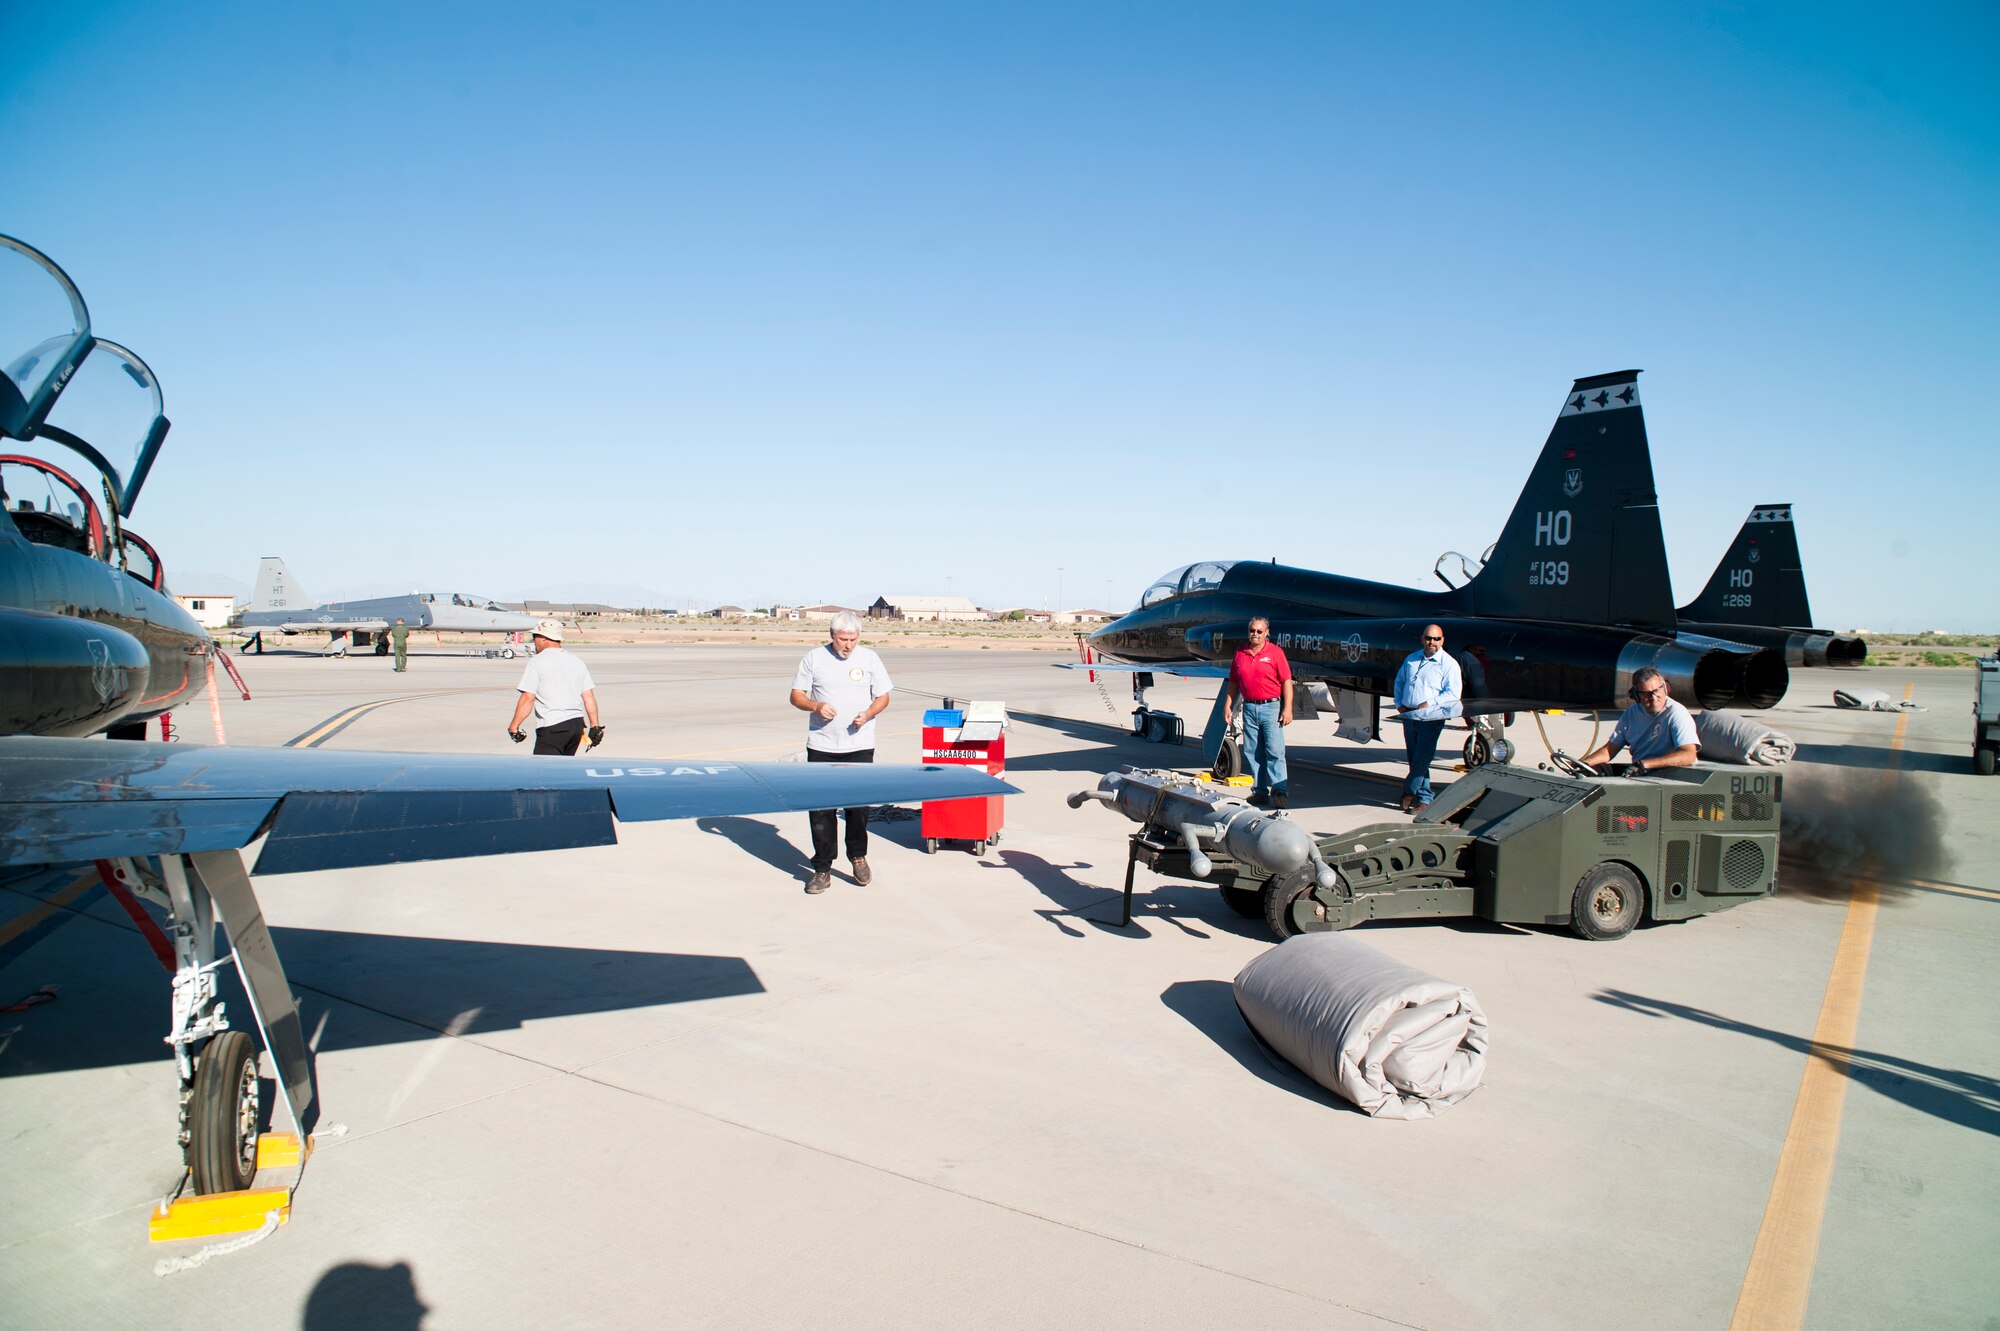 Raul Ceniceros, M1 Support Services maintainer, prepares to load a radar jammer pod onto a T-38 Talon at Holloman Air Force Base, N.M., Jun 4. For the first time, the T-38 has been modified to fit the ALQ-188 pod for use as a radar jammer. This newest addition to the T-38 will assist in its training mission by making it a more effective adversary for the F-22 Raptor during simulated combat exercises. (U.S. Air Force photo by Airman 1st Class Daniel E. Liddicoet/Released)